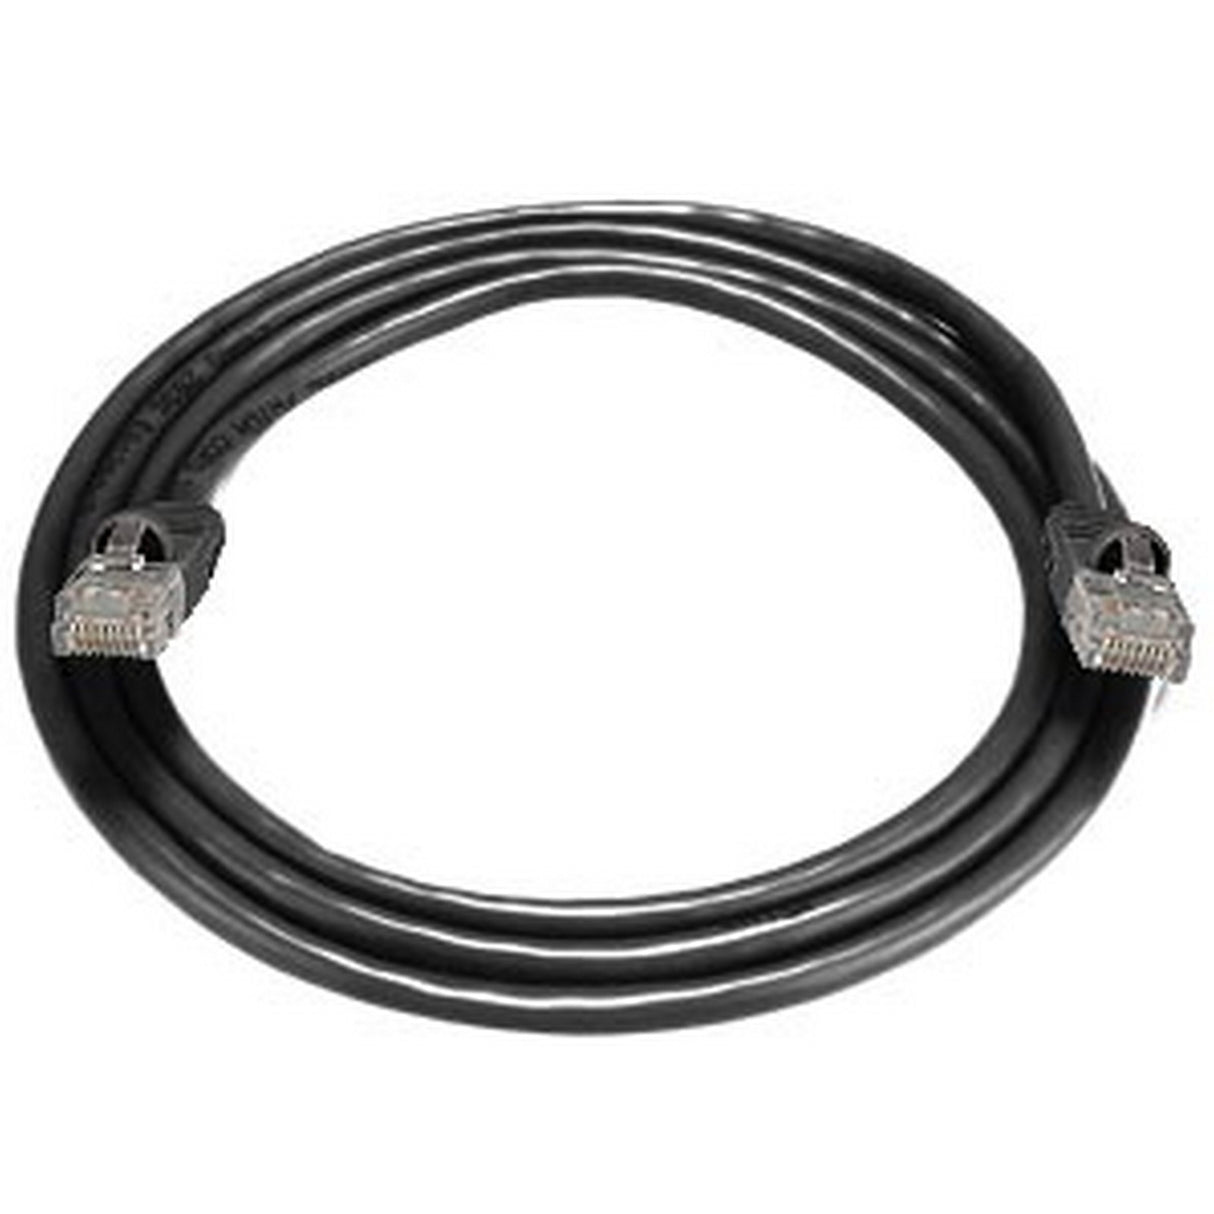 NTI CAT5-10-BLACK CAT5 Cable, Male to Male, Black, 10-Foot